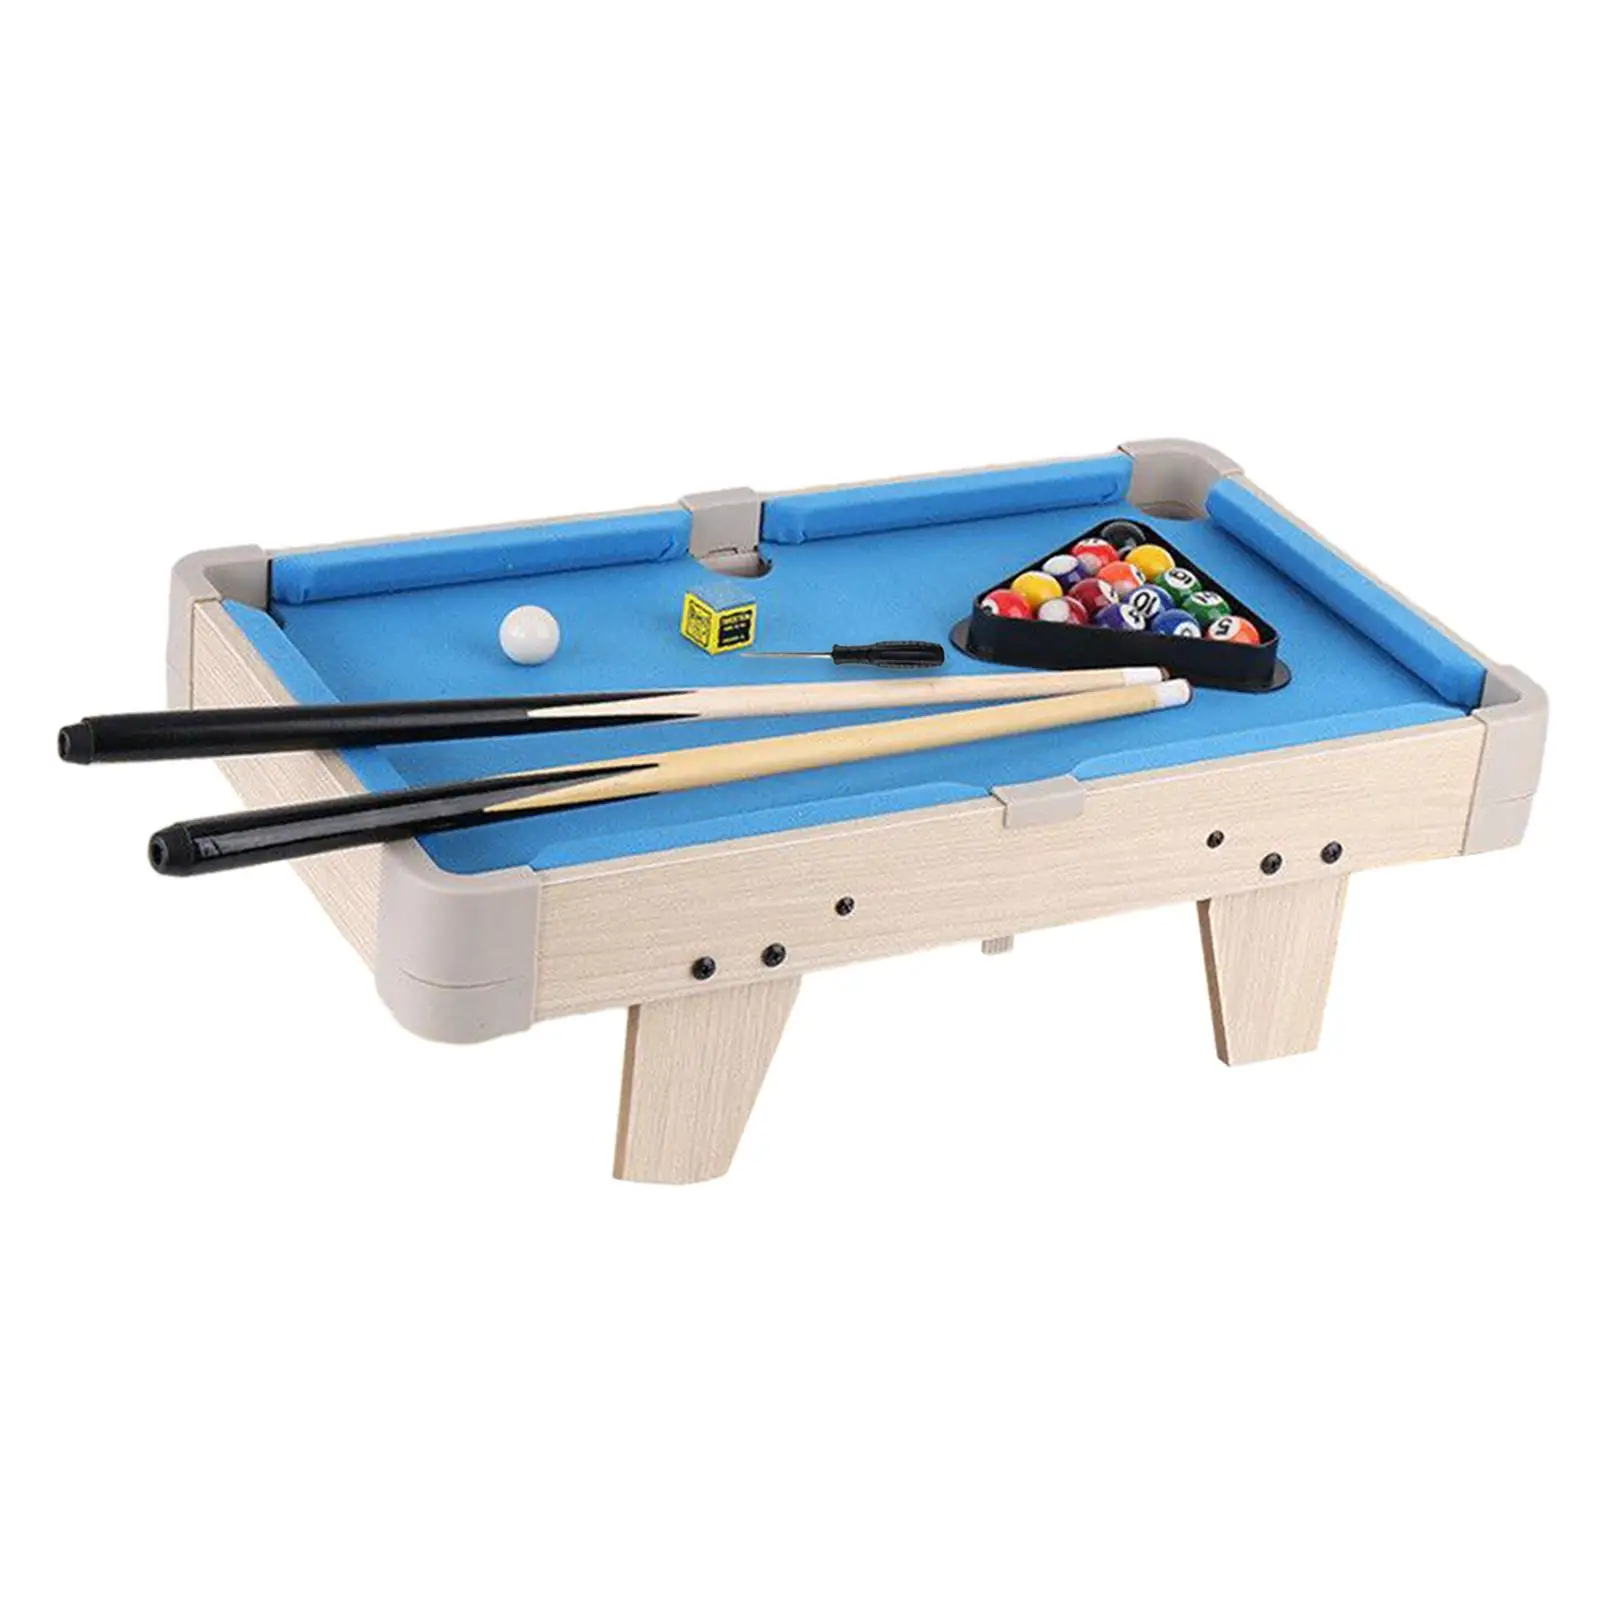 Portable Pool Table Set Desktop Snooker Home Office Use, Parent Child Interaction Game Toy Small Tabletop Billiards for Adult